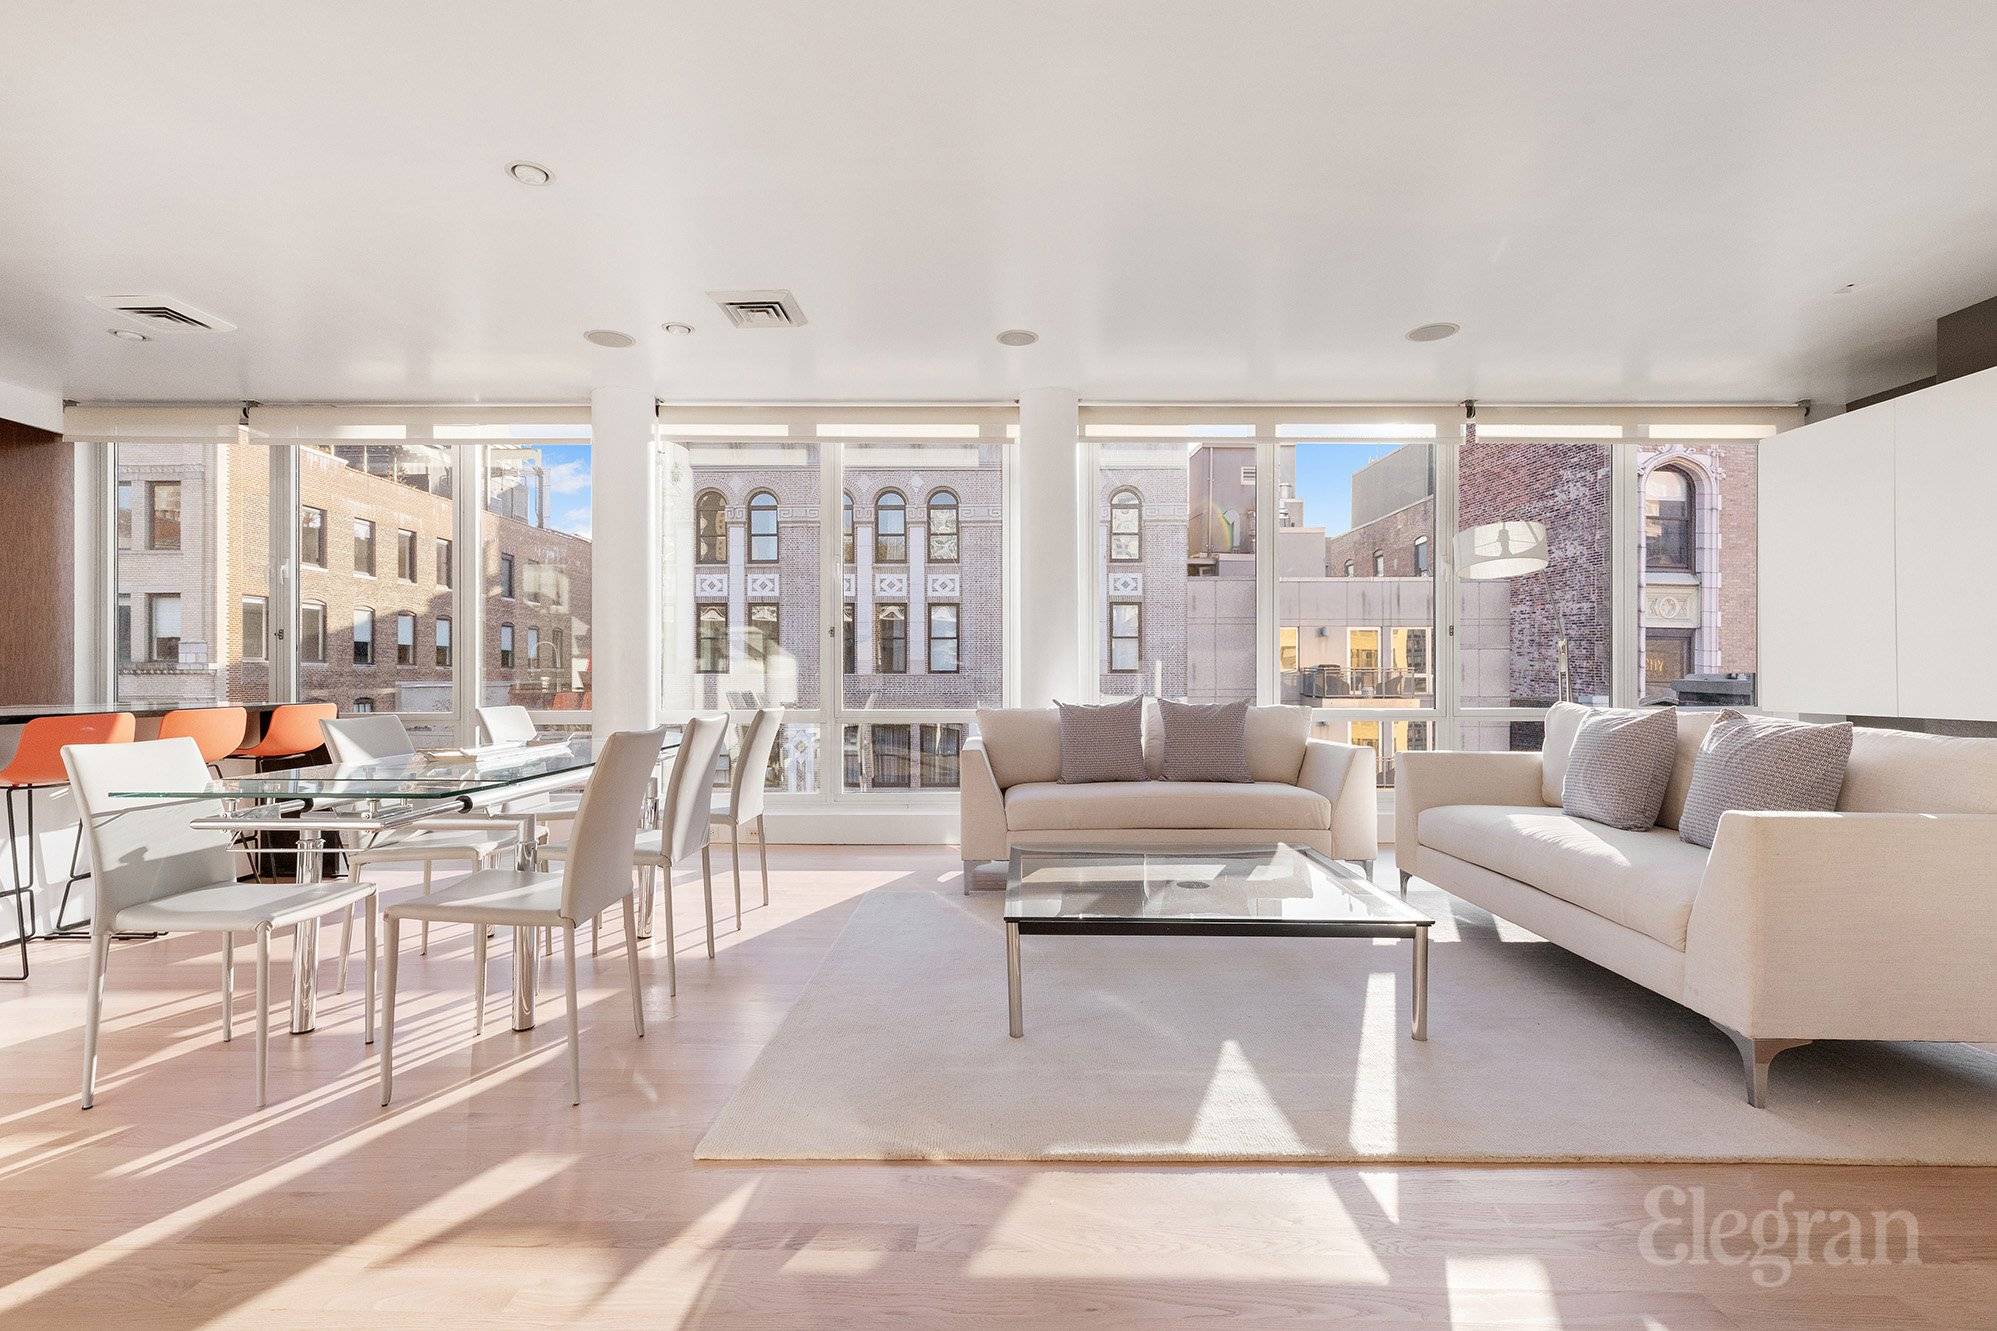 Penthouse B welcomes you in with a massive south facing living space, complete with a fireplace, custom entertainment console, and floor to ceiling glass windows that highlight pre war architecture ...